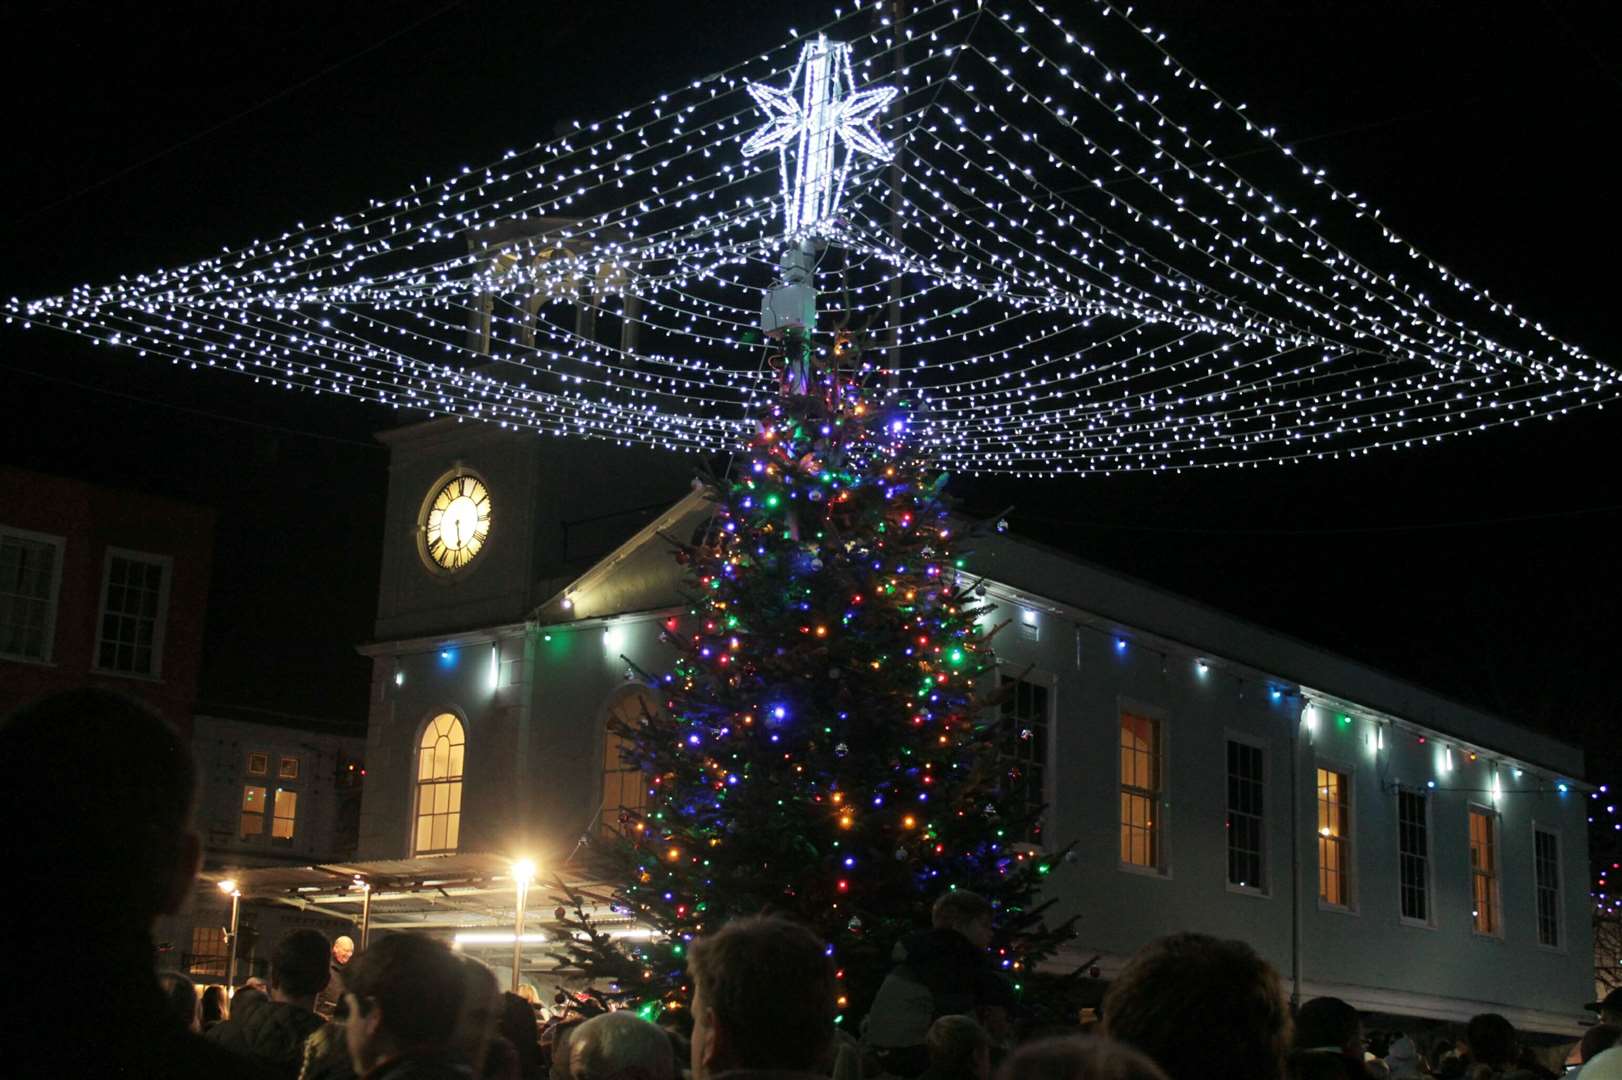 The Faversham Christmas Lights switch-on event last year